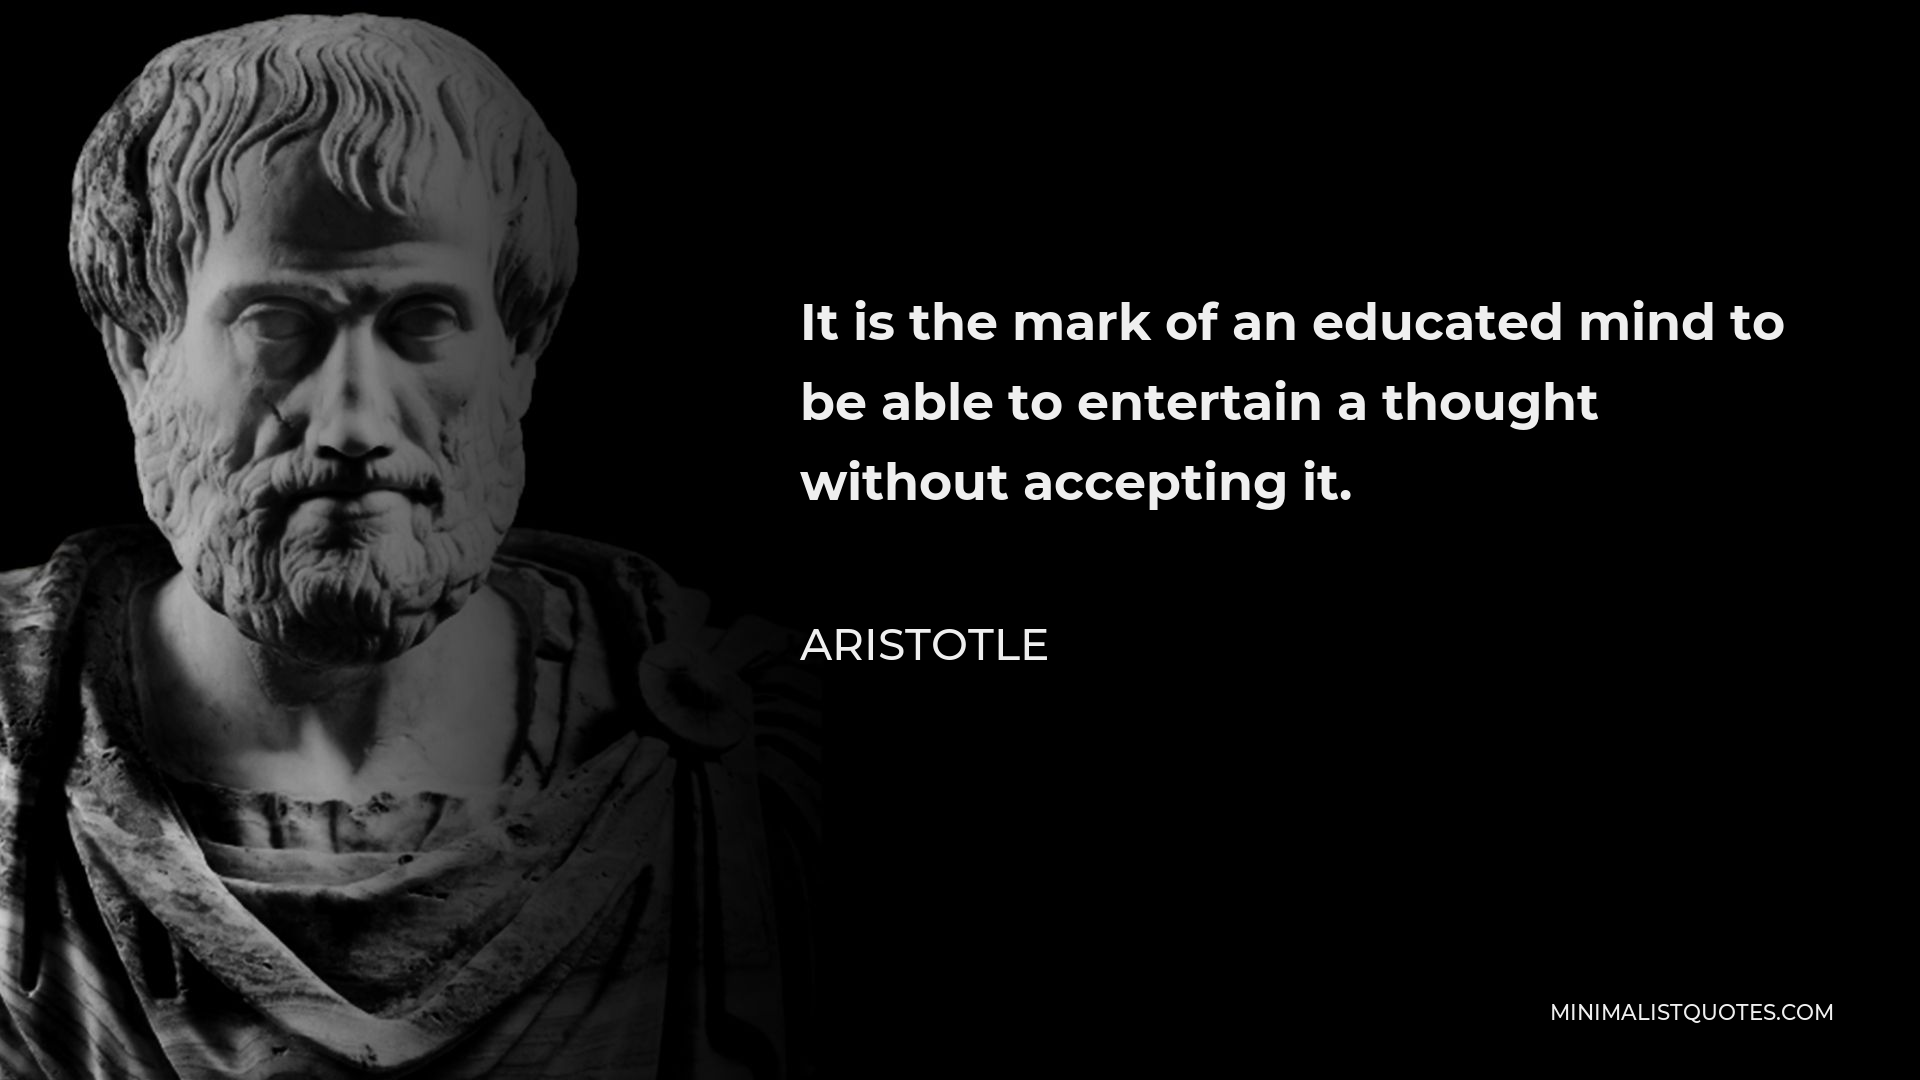 Aristotle Quote - It is the mark of an educated mind to be able to entertain a thought without accepting it.